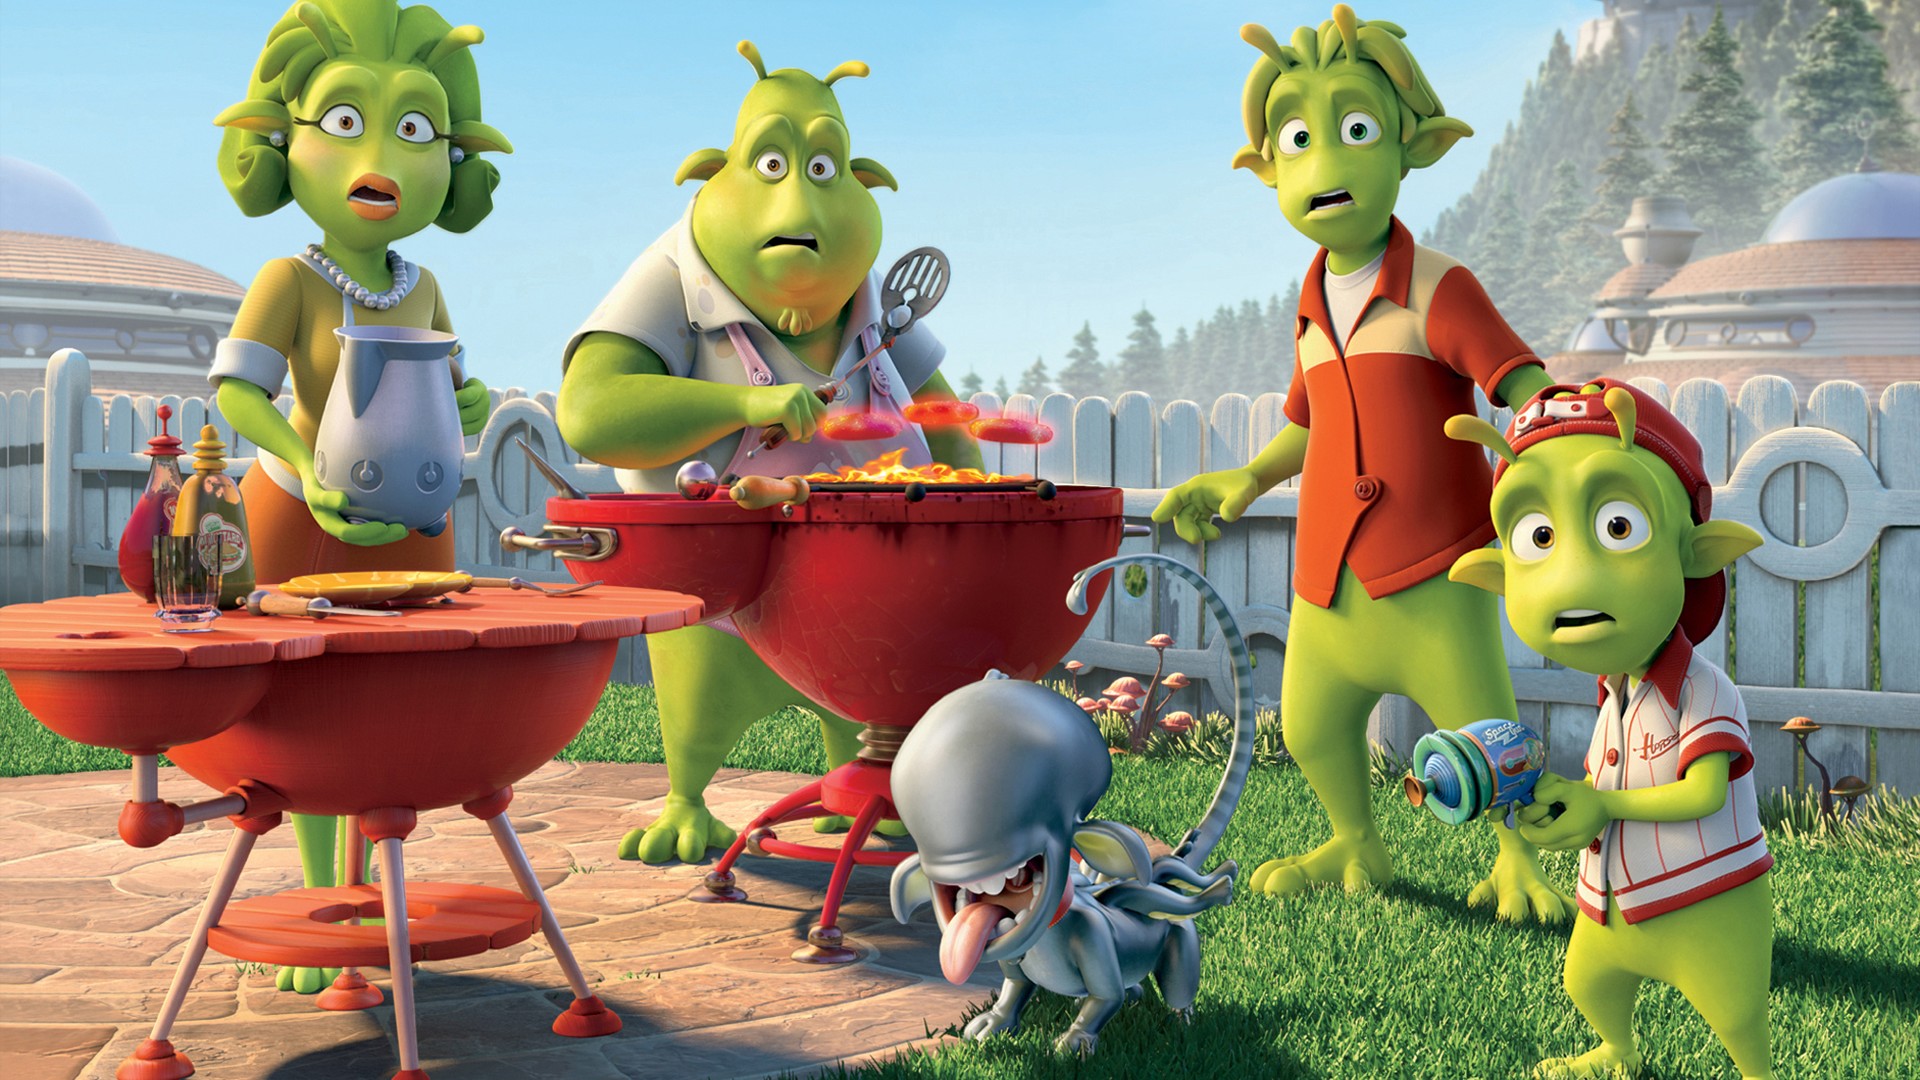 Movie Planet 51 HD Wallpaper Background Image.